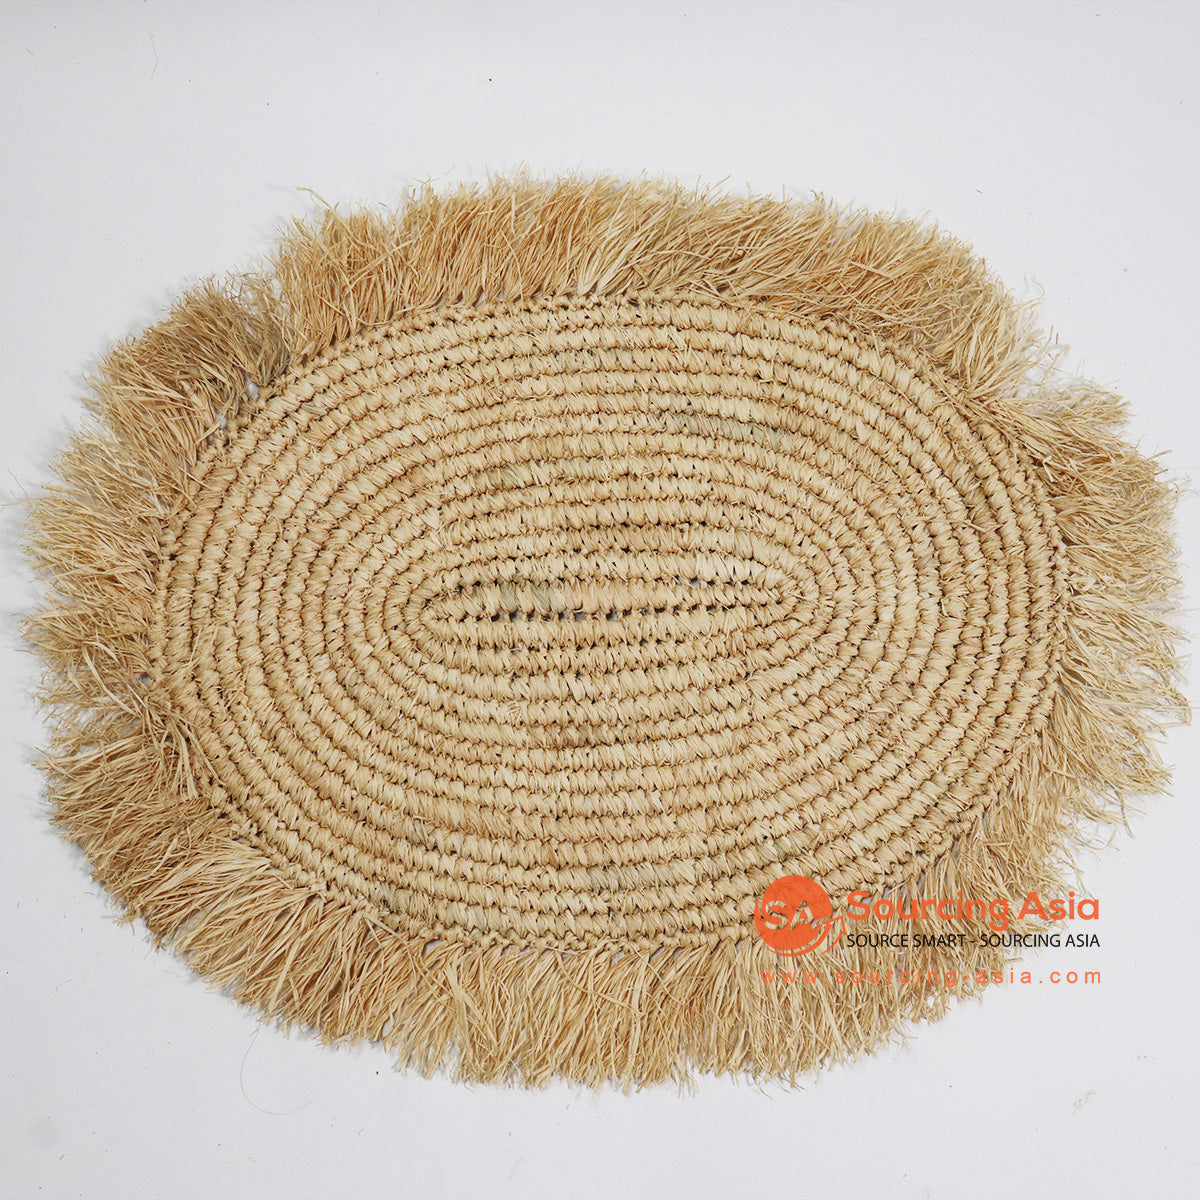 HBSC018 NATURAL RAFFIA OVAL DECORATIVE PLACEMAT WITH FRINGE